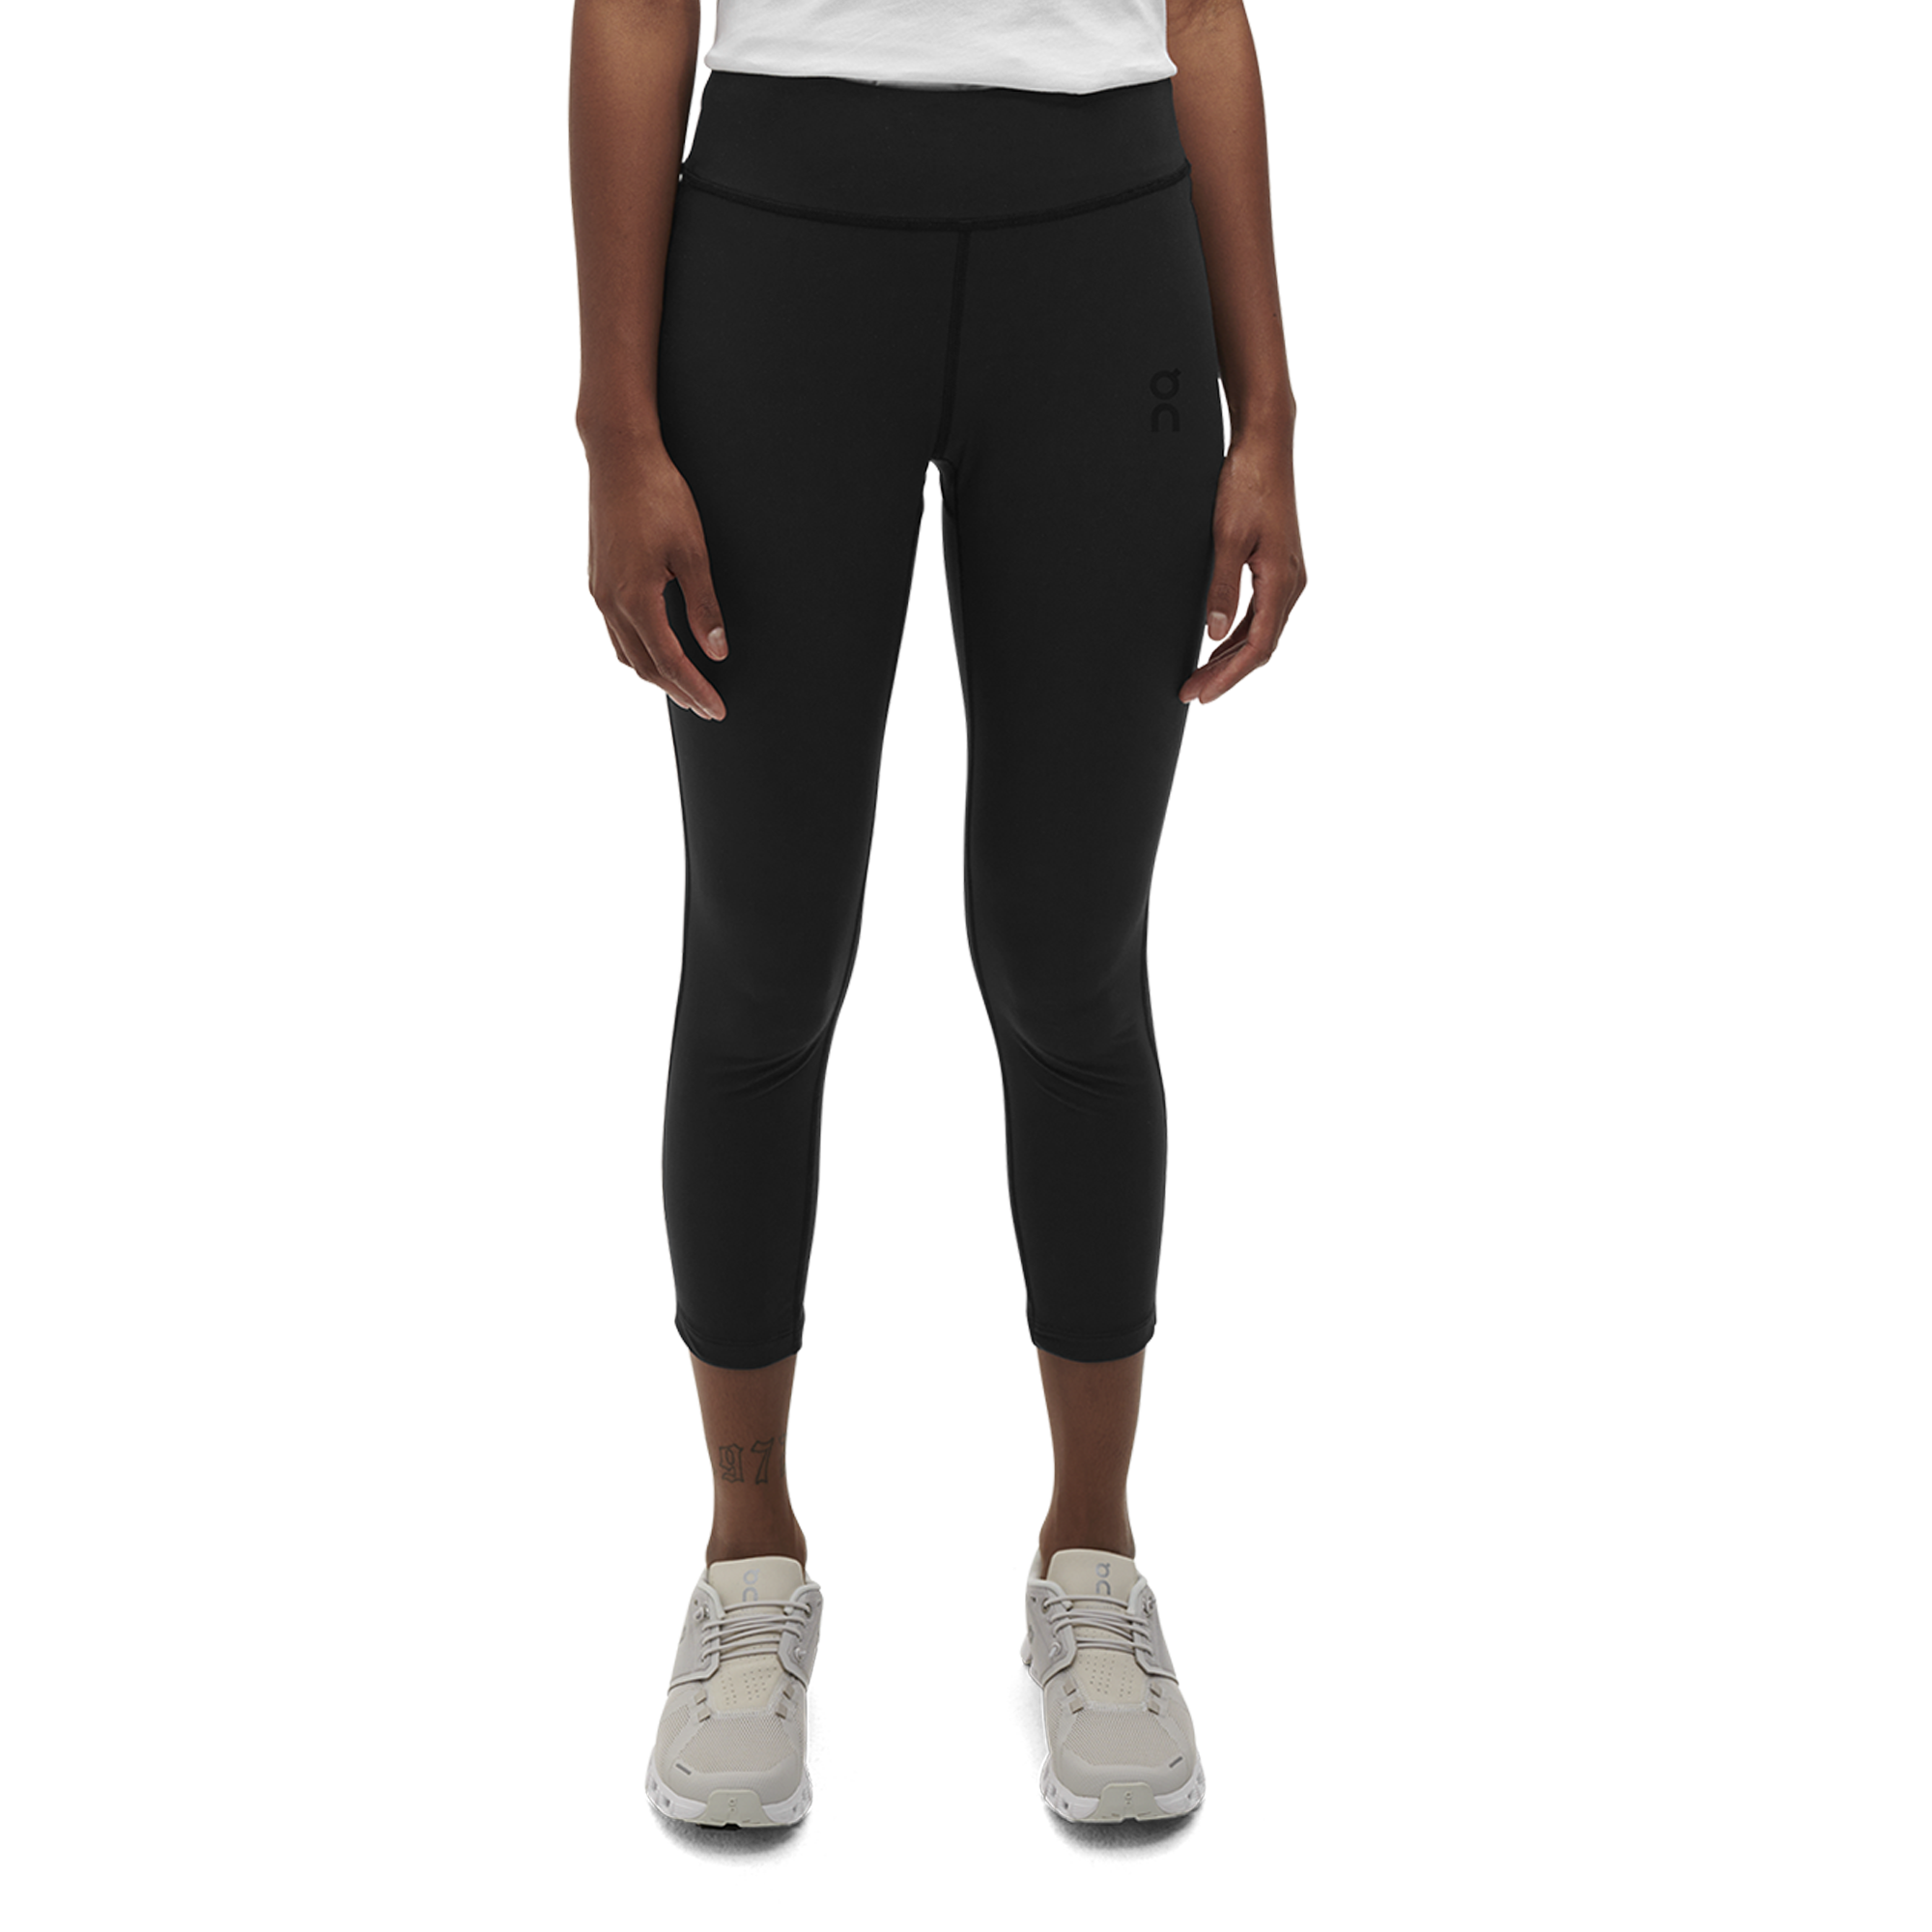 Buy Body Smith Women's Black Active Sports Tights Leggings Jeggings Online  - Get 21% Off